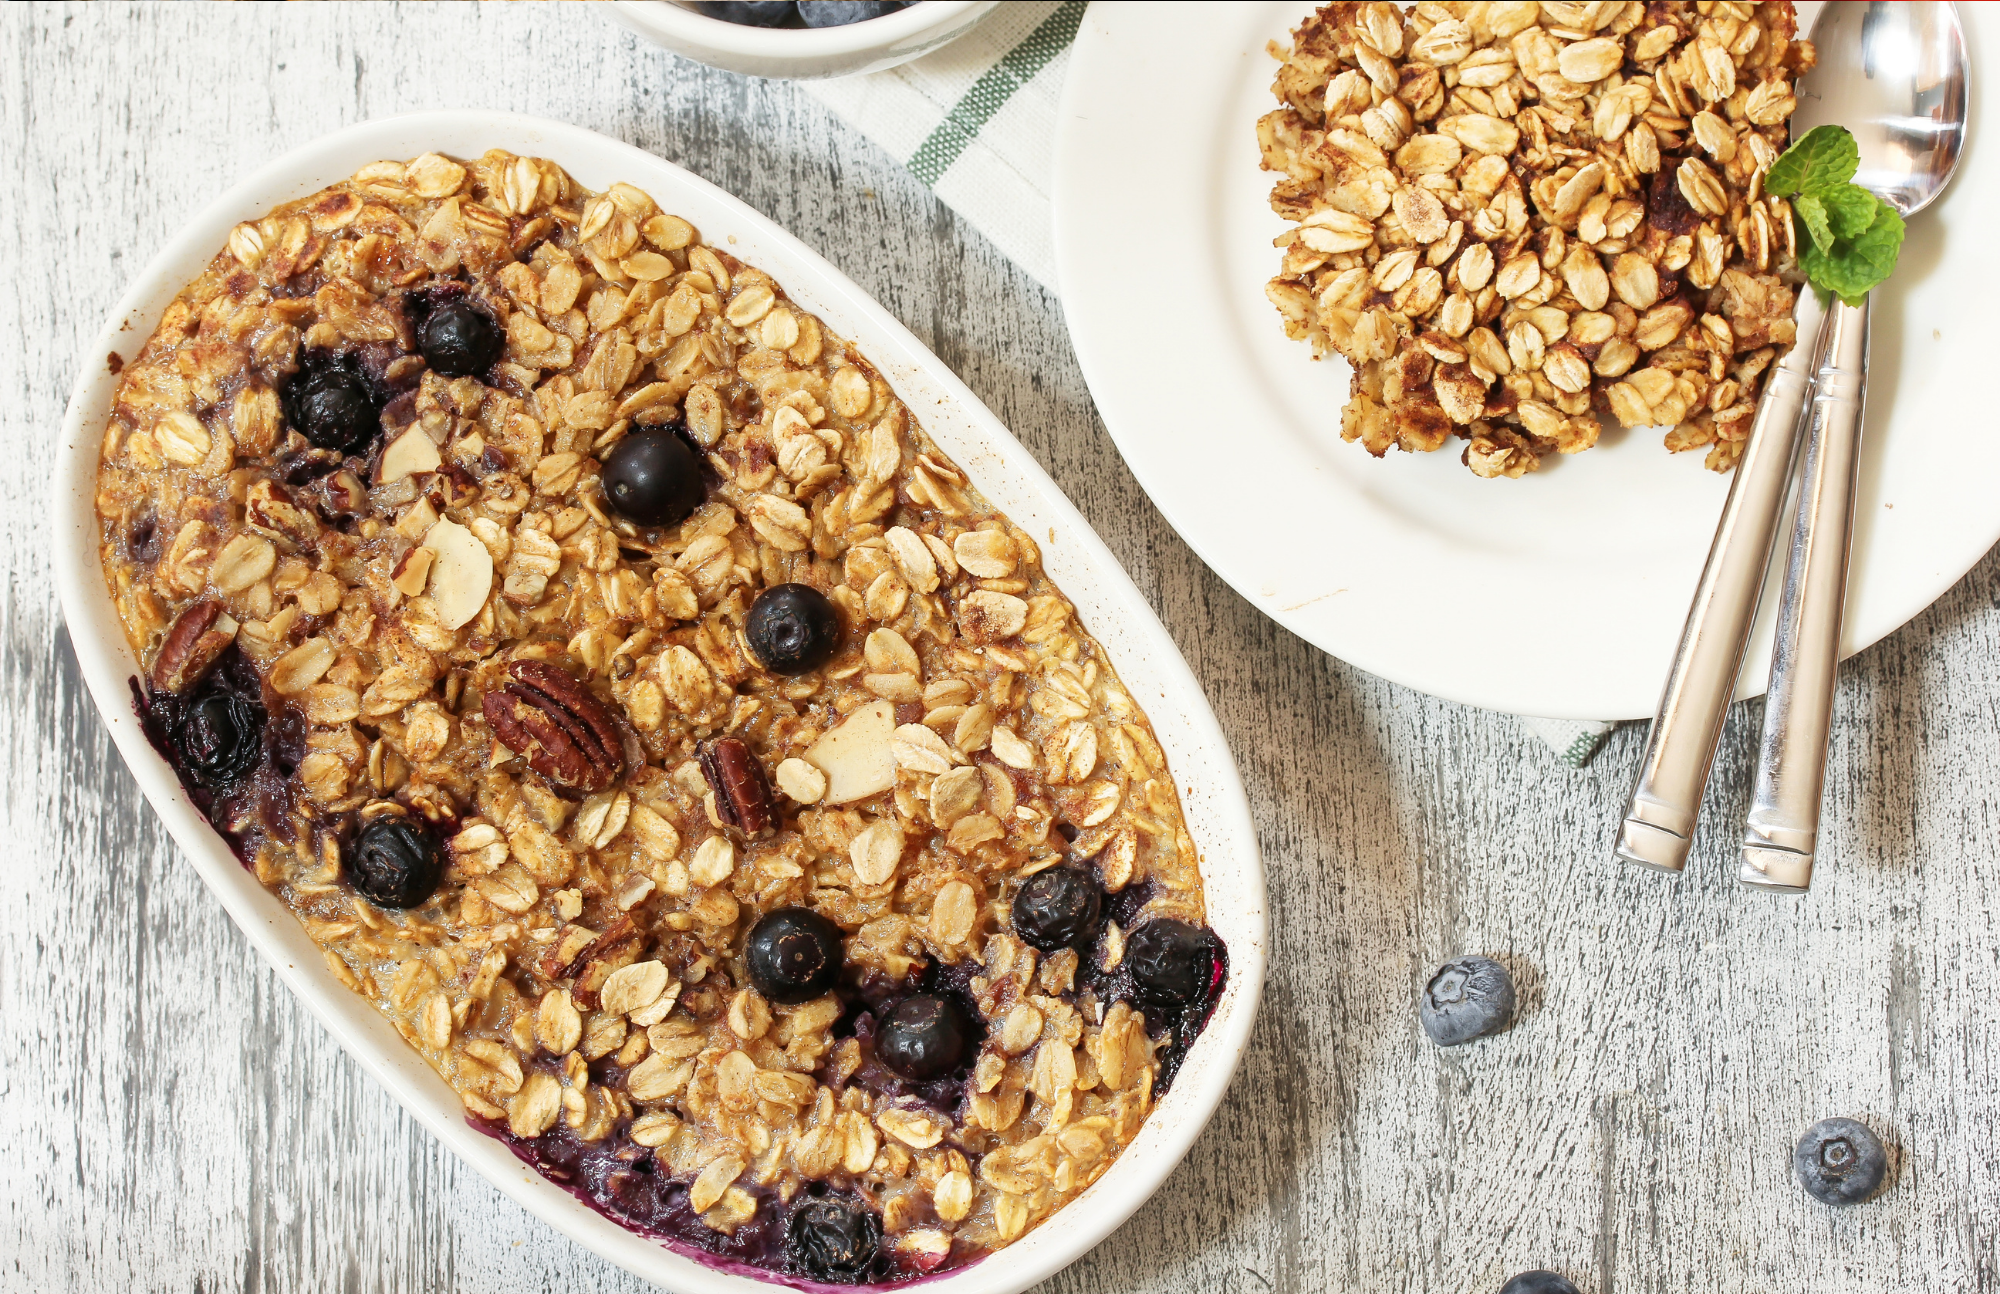 Blueberry baked oatmeal in an oval white dish pictured on a wooden table